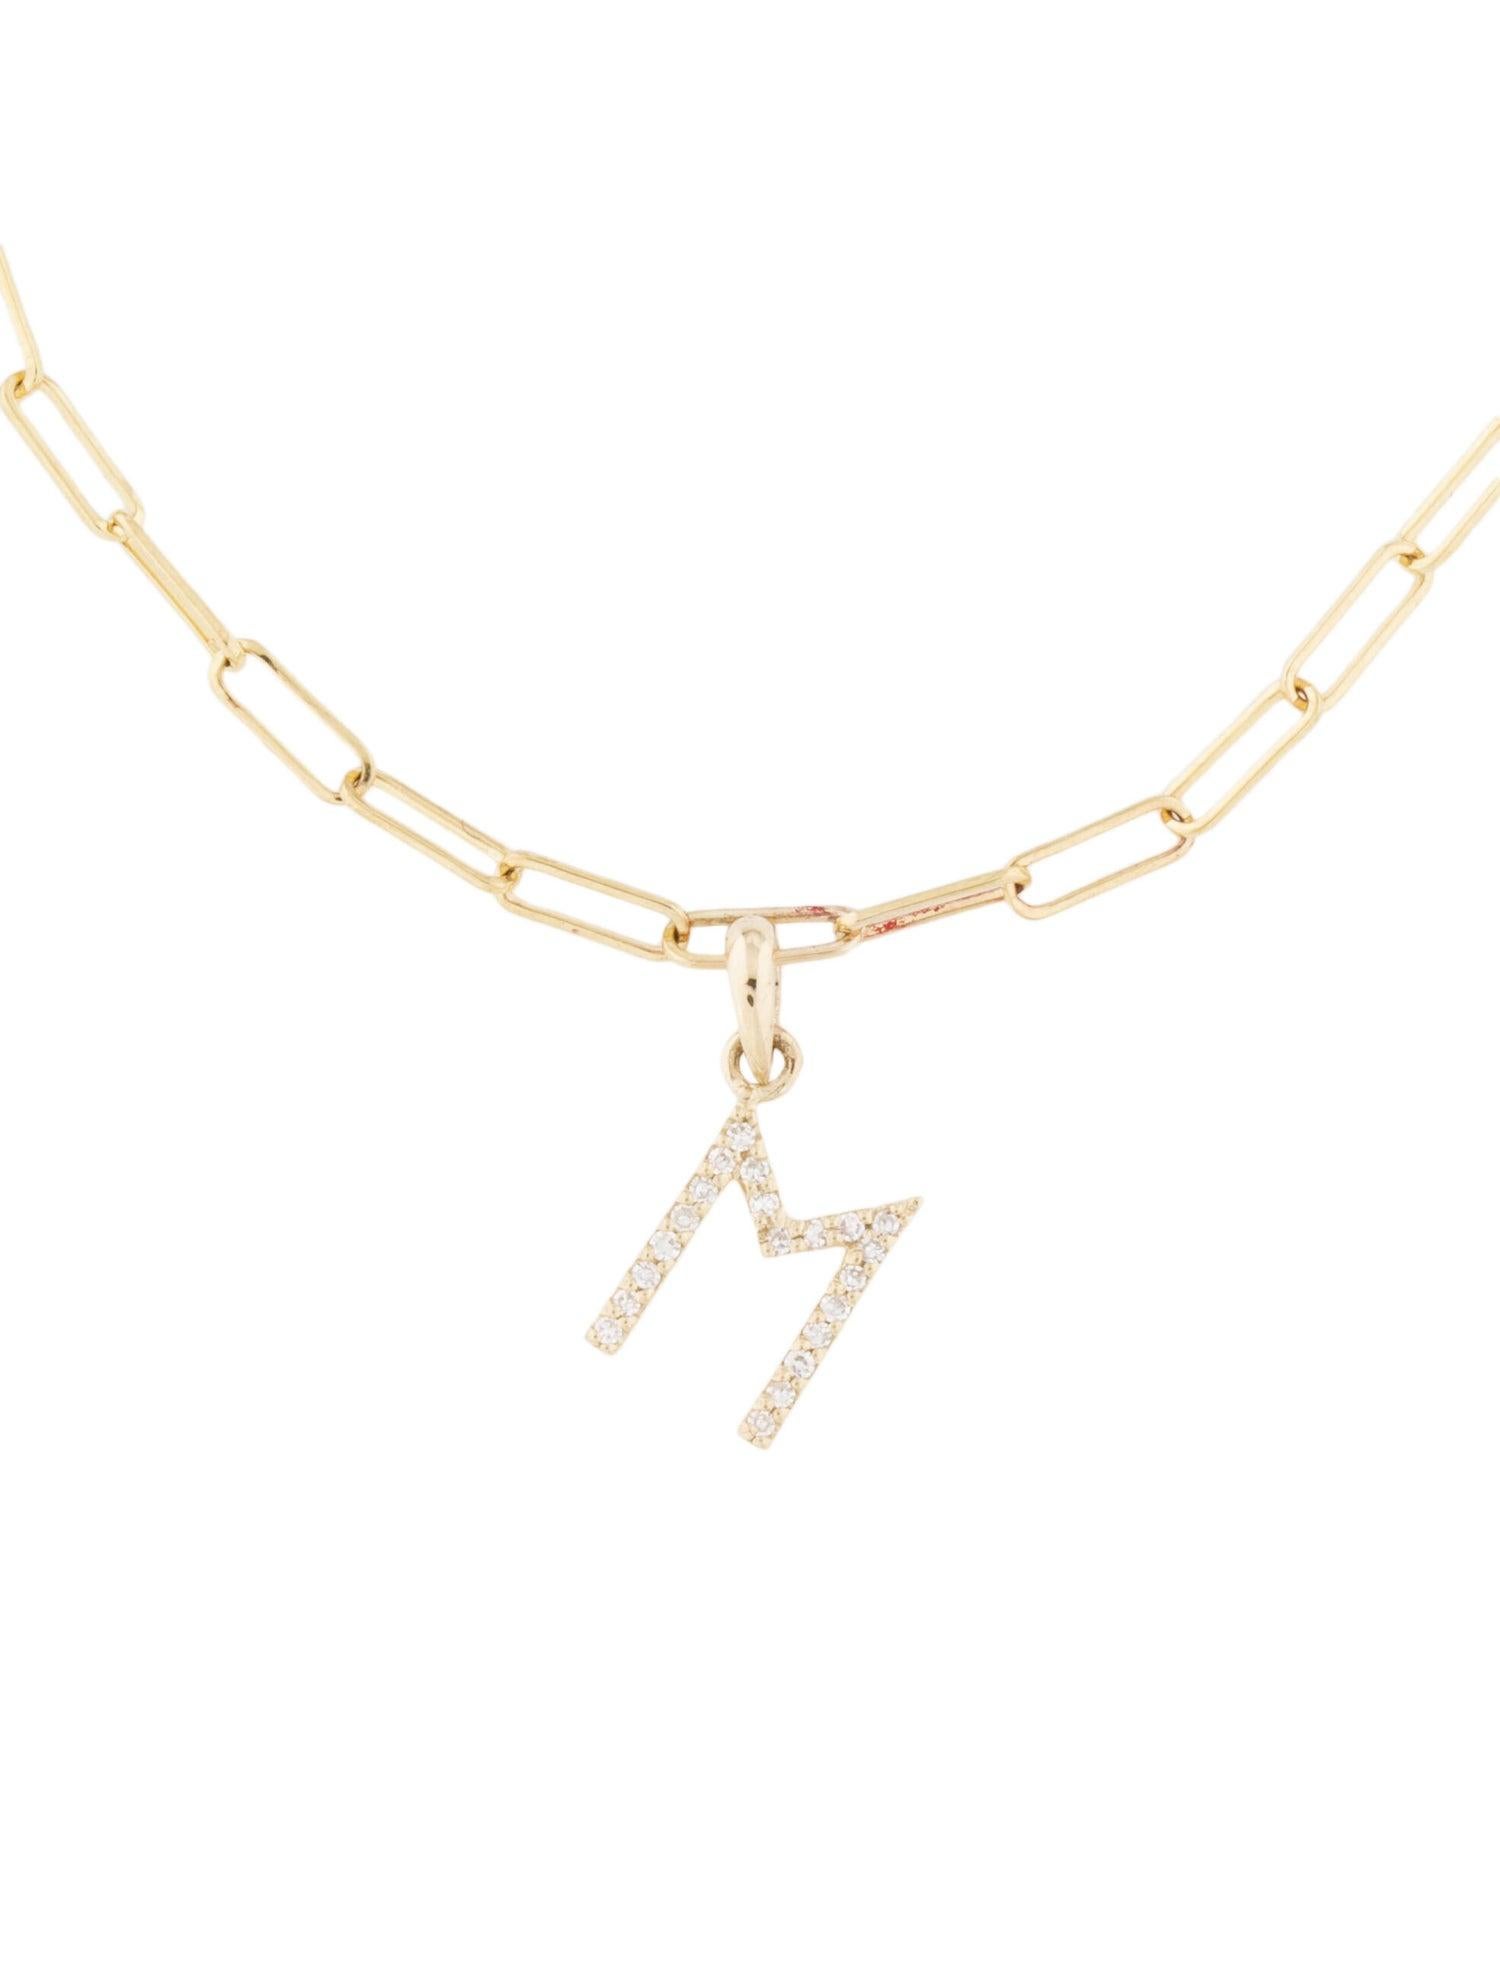 This is an adorable Initial Letter Bracelet crafted of 14k Yellow Gold with approximately 0.05 ct. Round Sparkly Diamonds. Diamond Color and Clarity GH-SI1-SI2. Comes on an 7